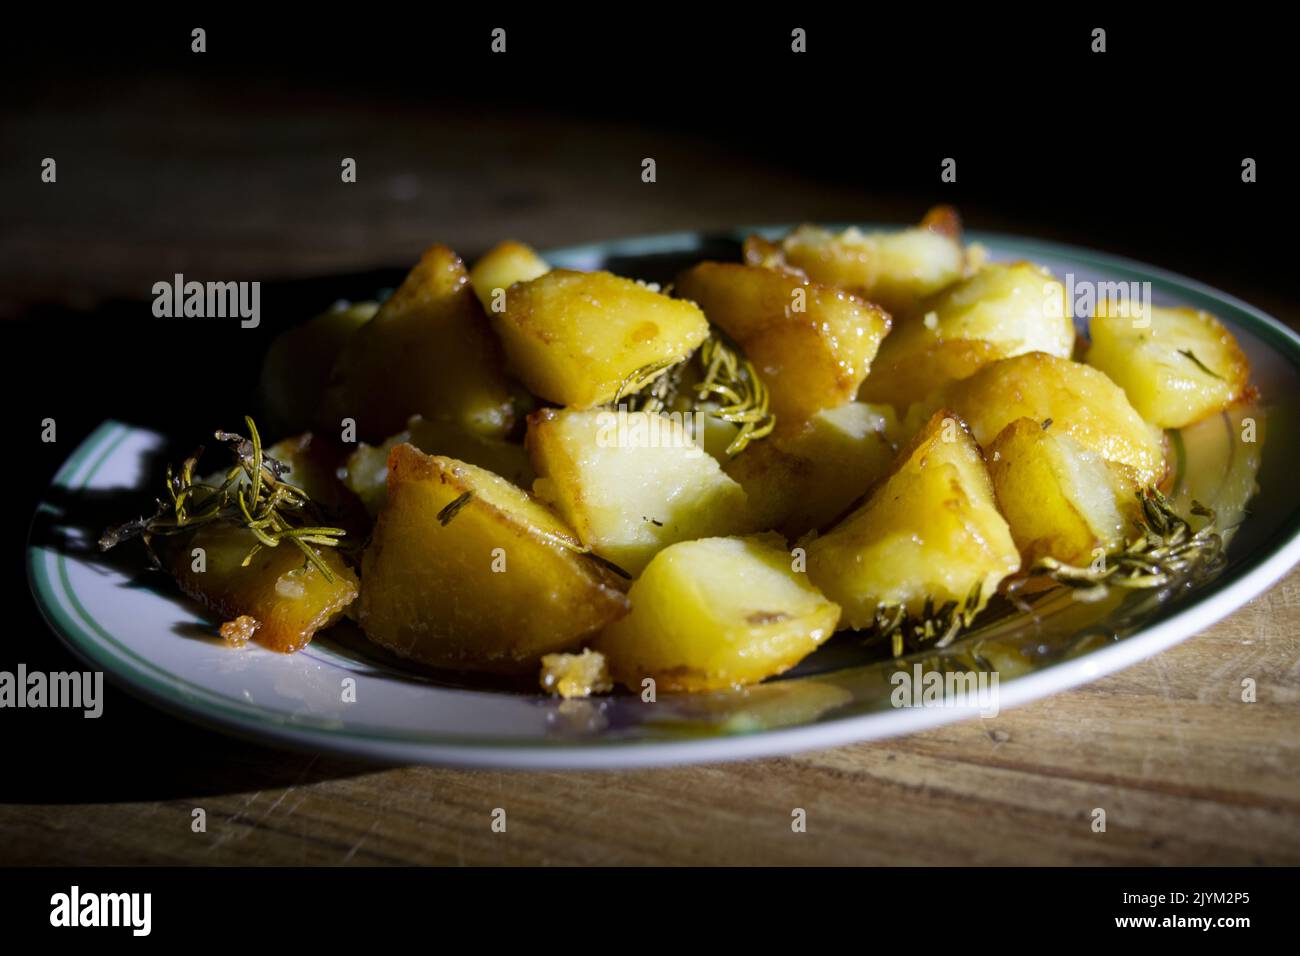 dish of baked potatoes with herbs and chiaroscuro light Stock Photo